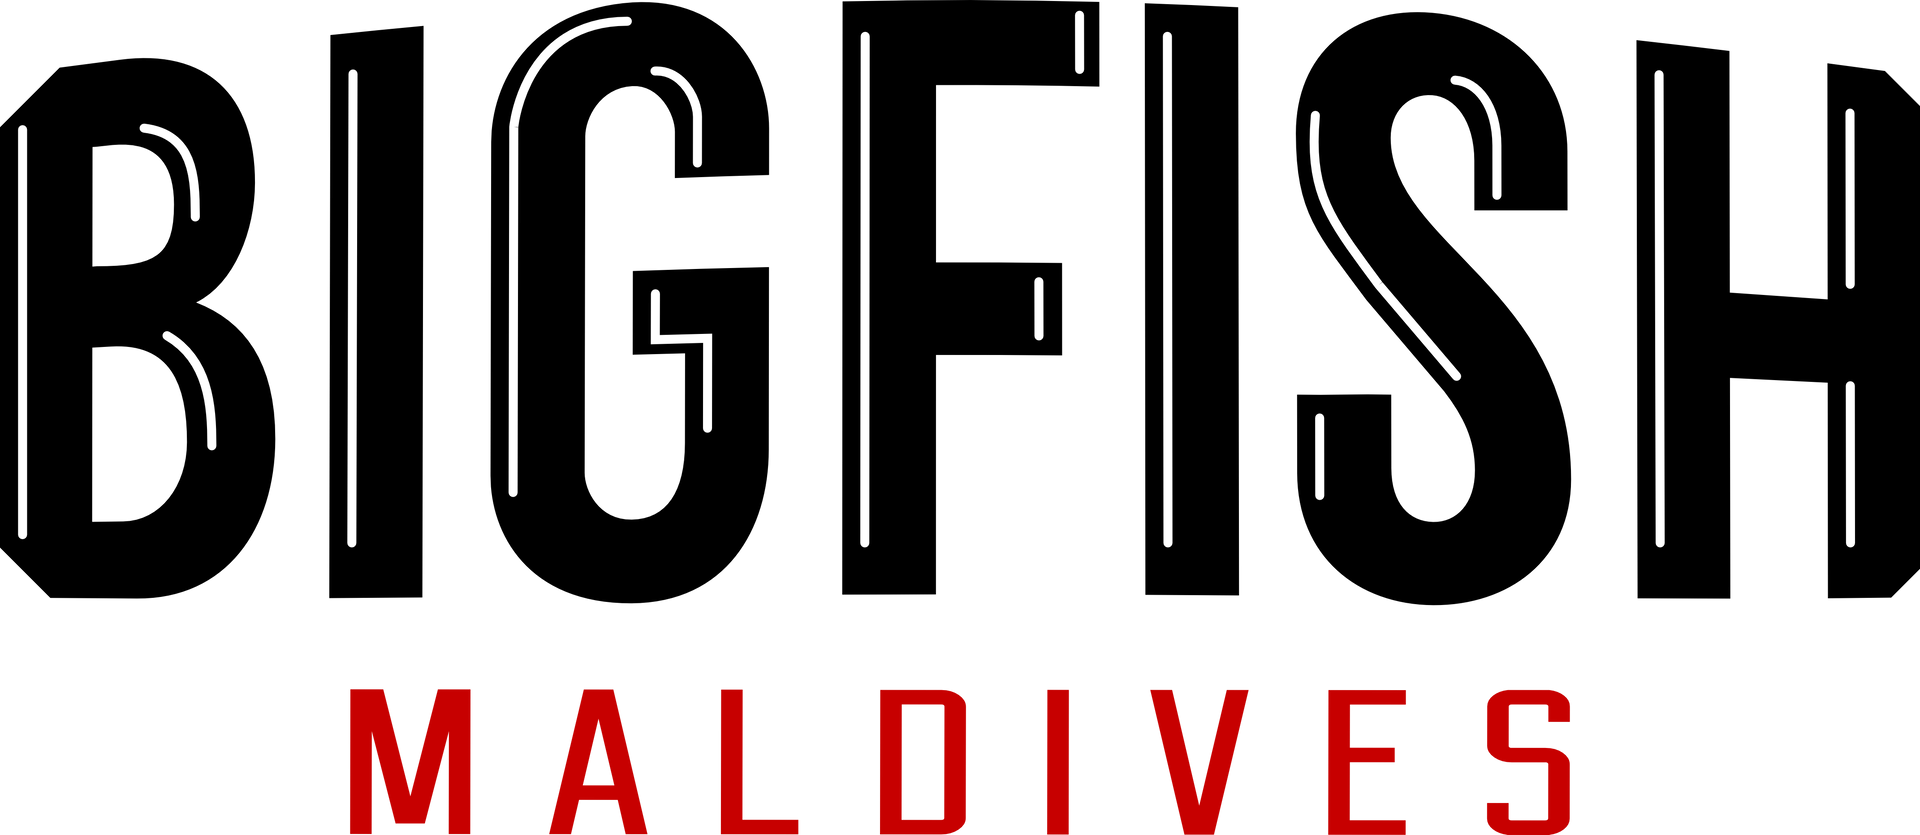 The logo for bigfish maldives is black and red on a white background.